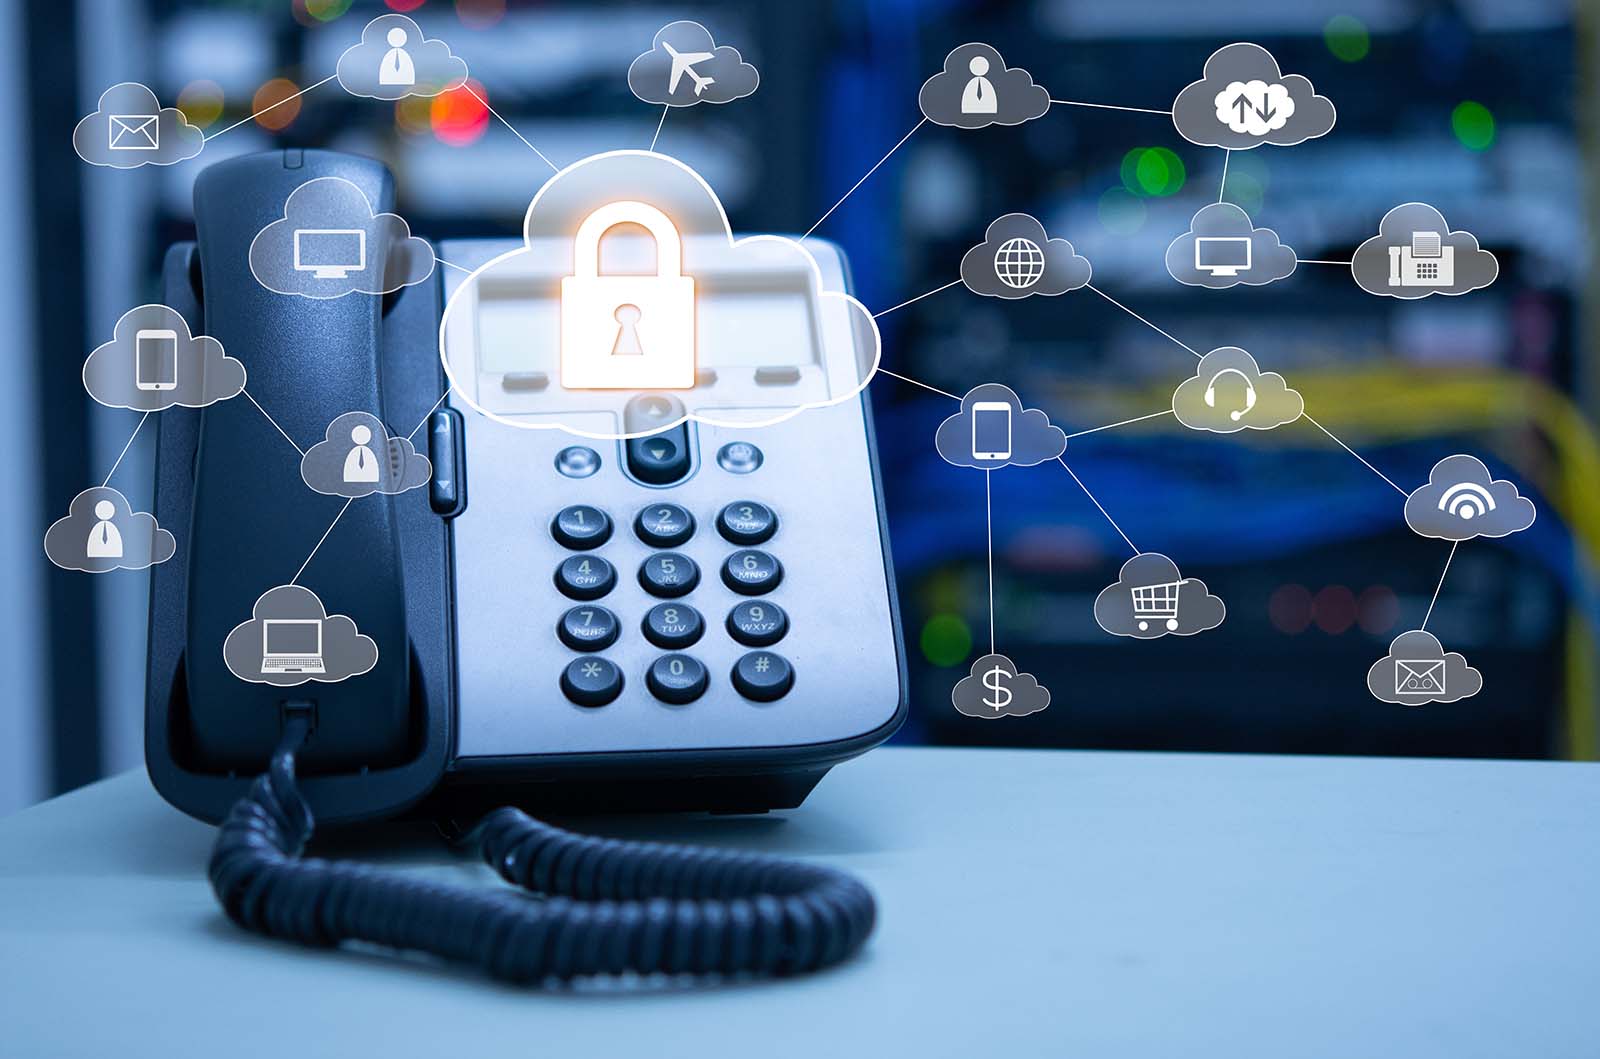 5 Advantages of Getting a Cloud Based VoIP Phone System for Your Small Business